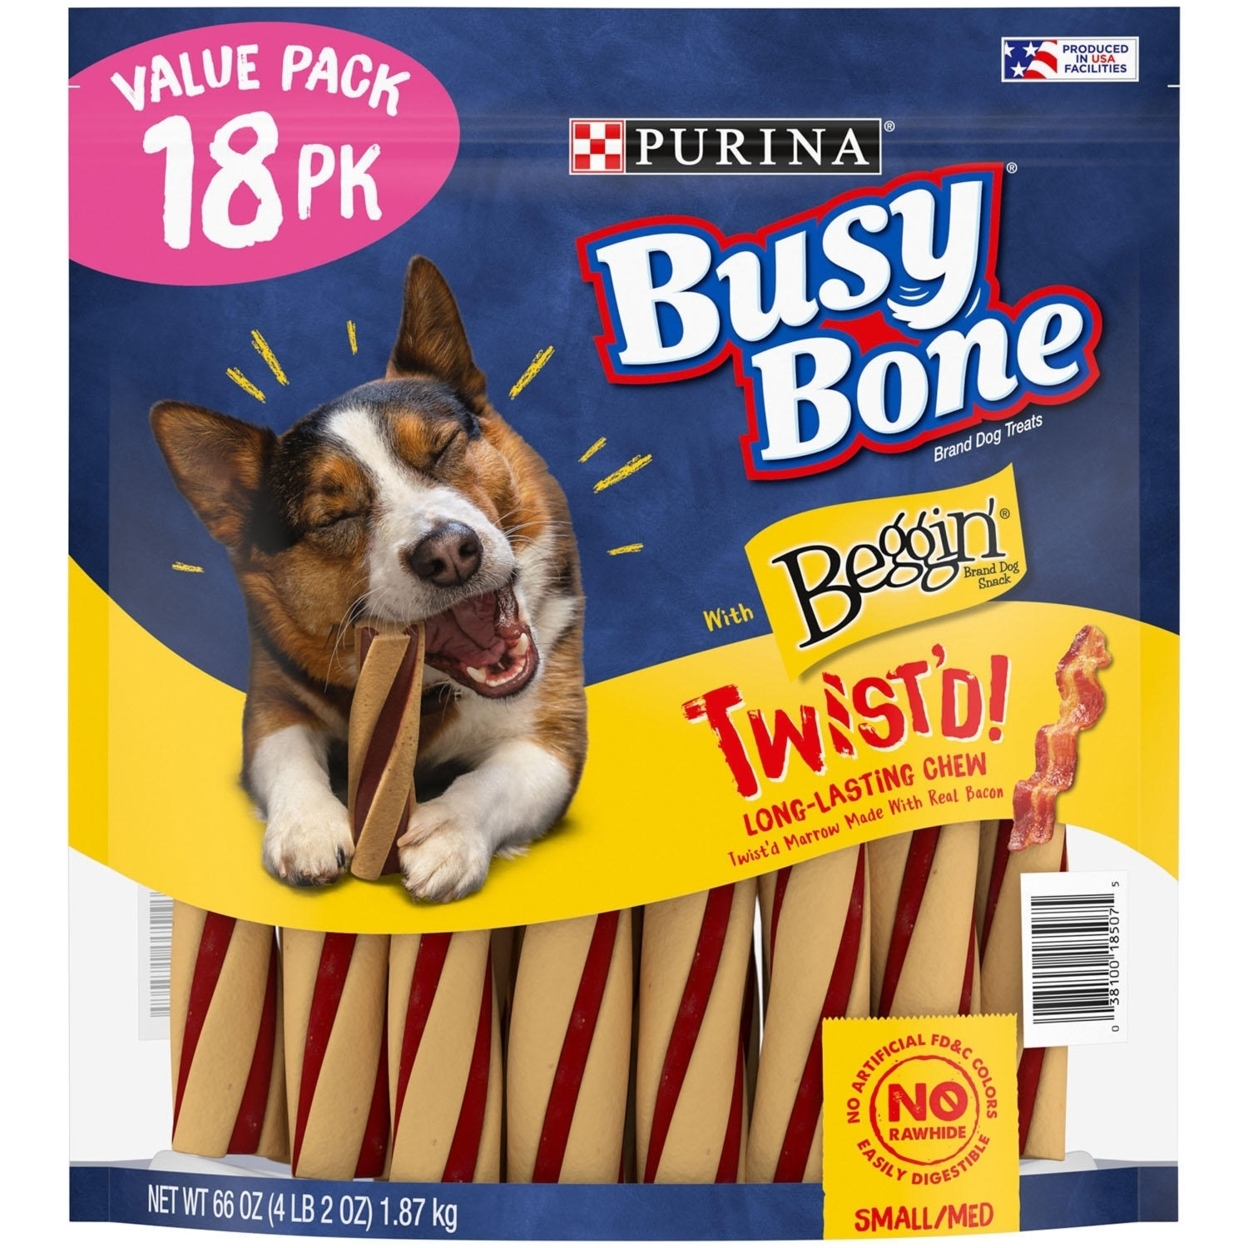 Purina Busy With Beggin' Twist'd Small/Medium Breed Dog Treats (18 Count)